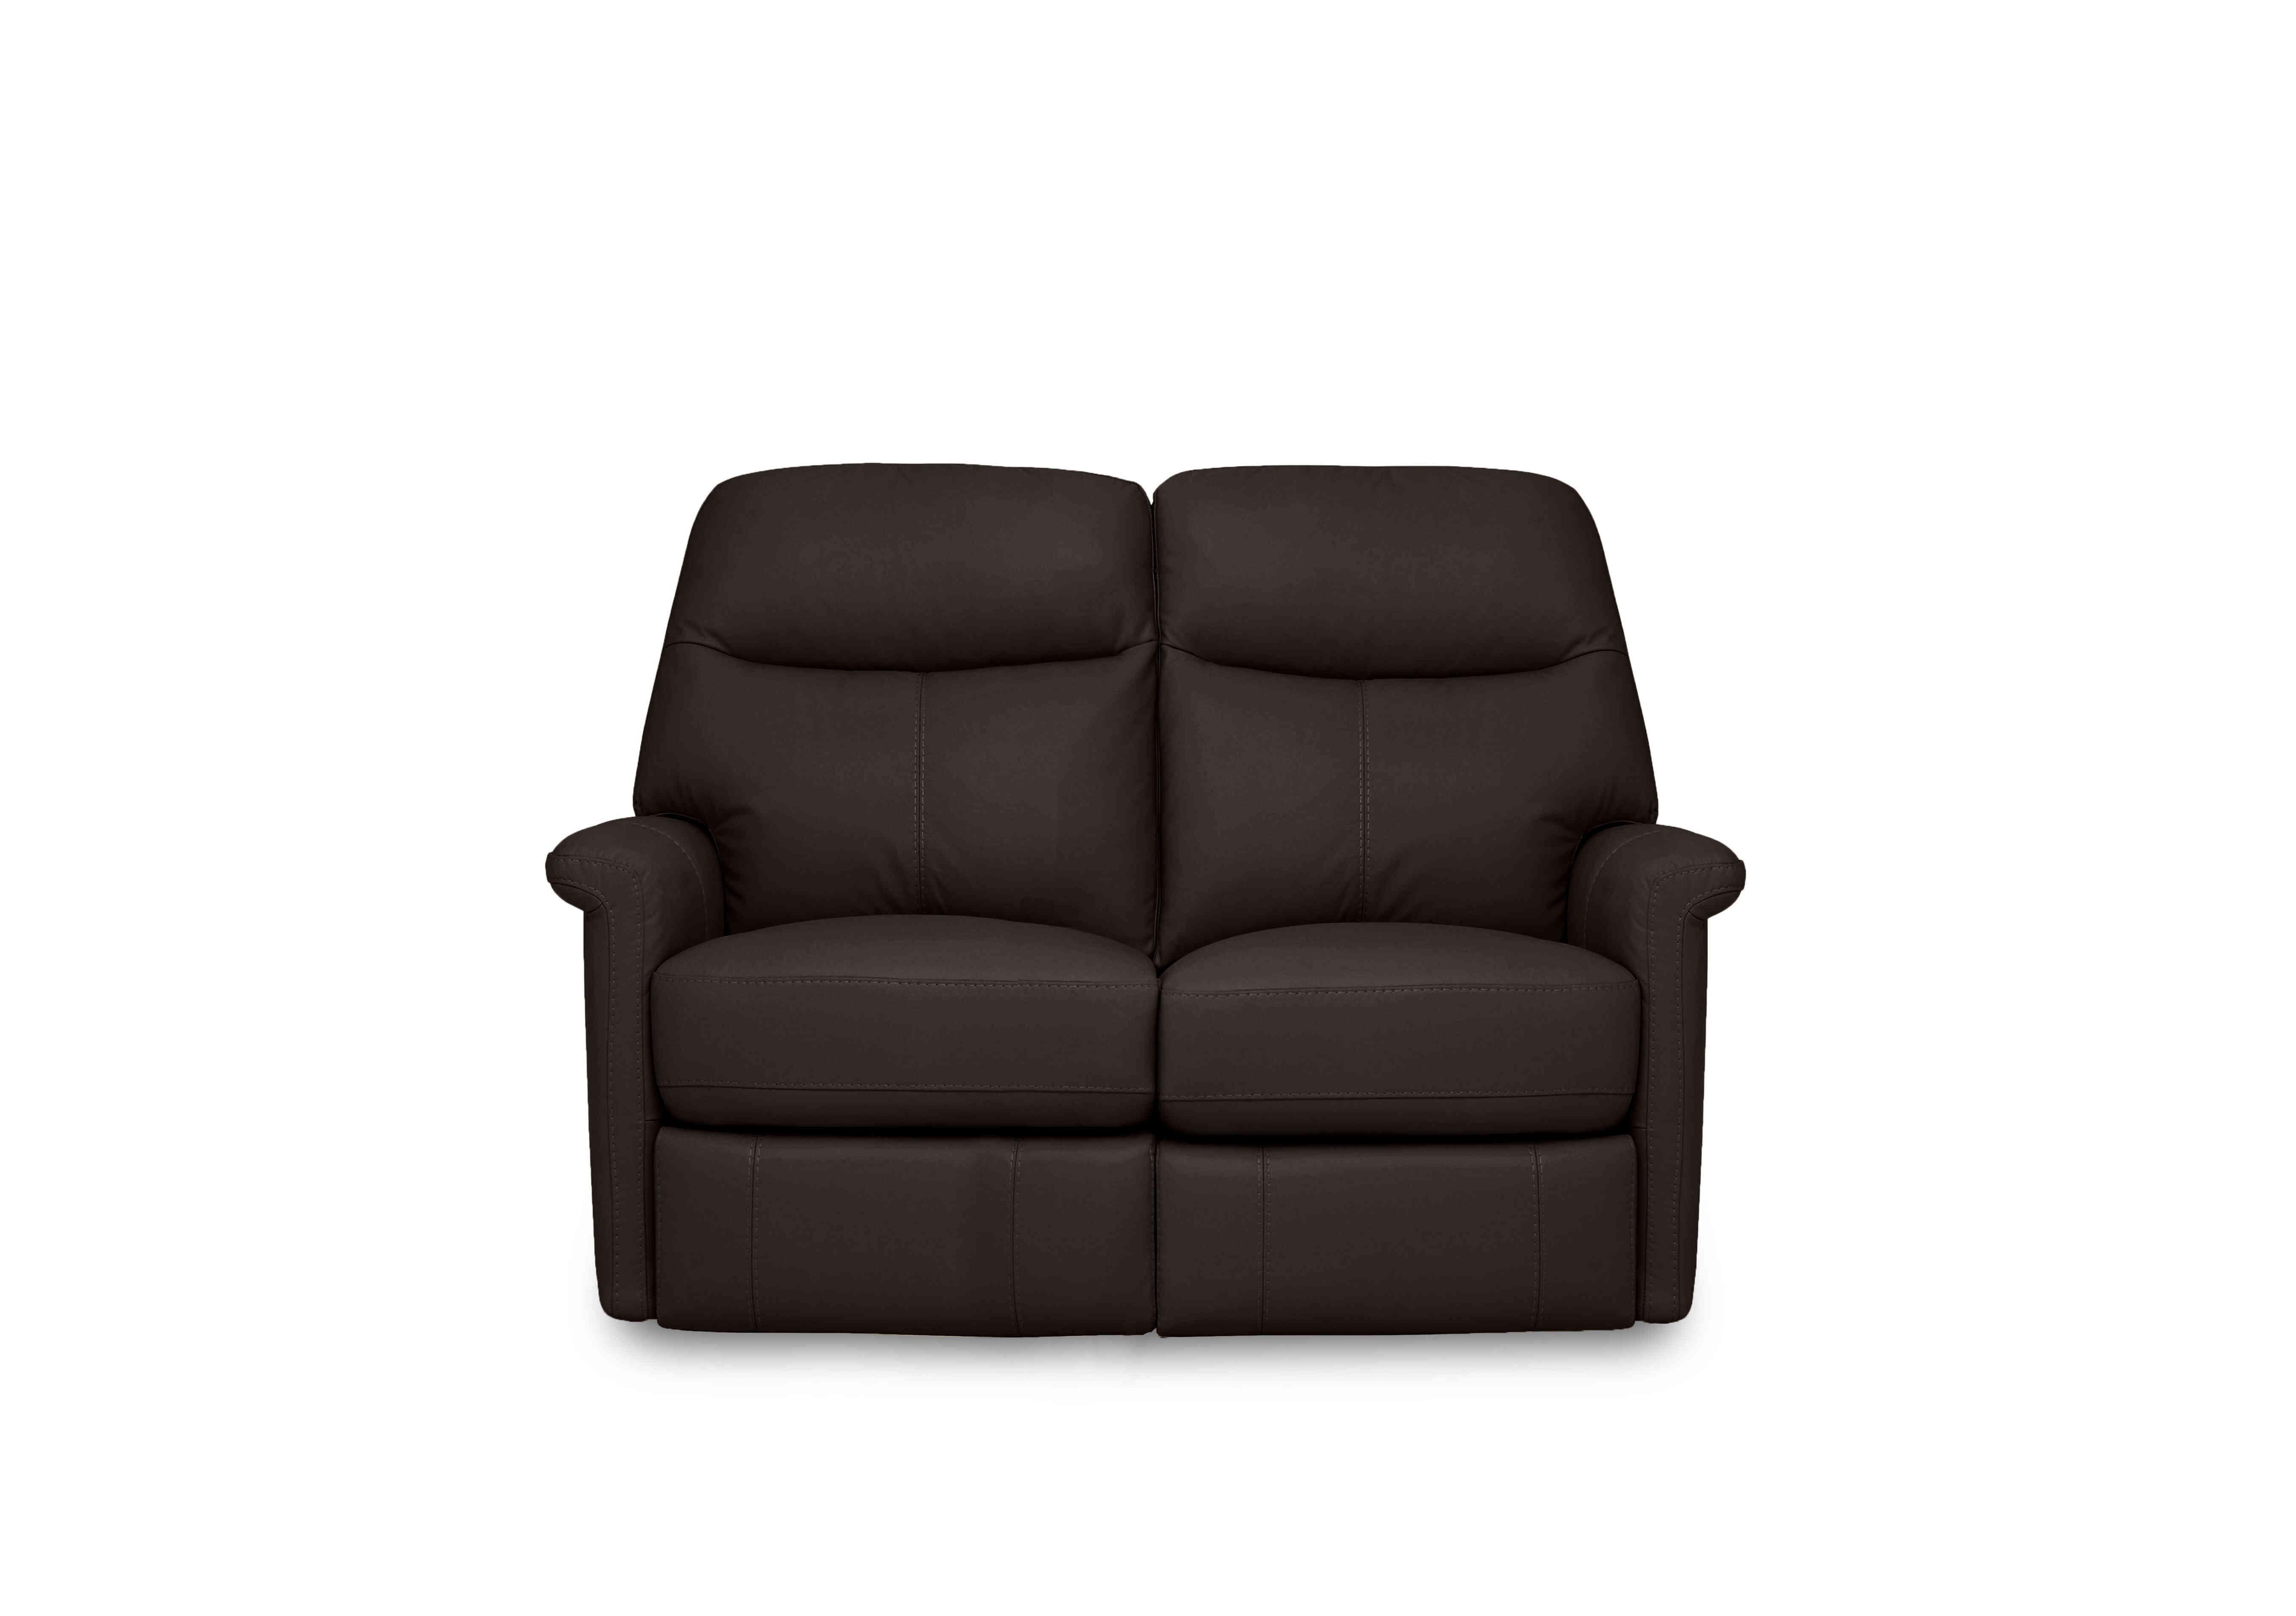 Compact Collection Lille 2 Seater Leather Sofa in Bv-1748 Dark Chocolate on Furniture Village